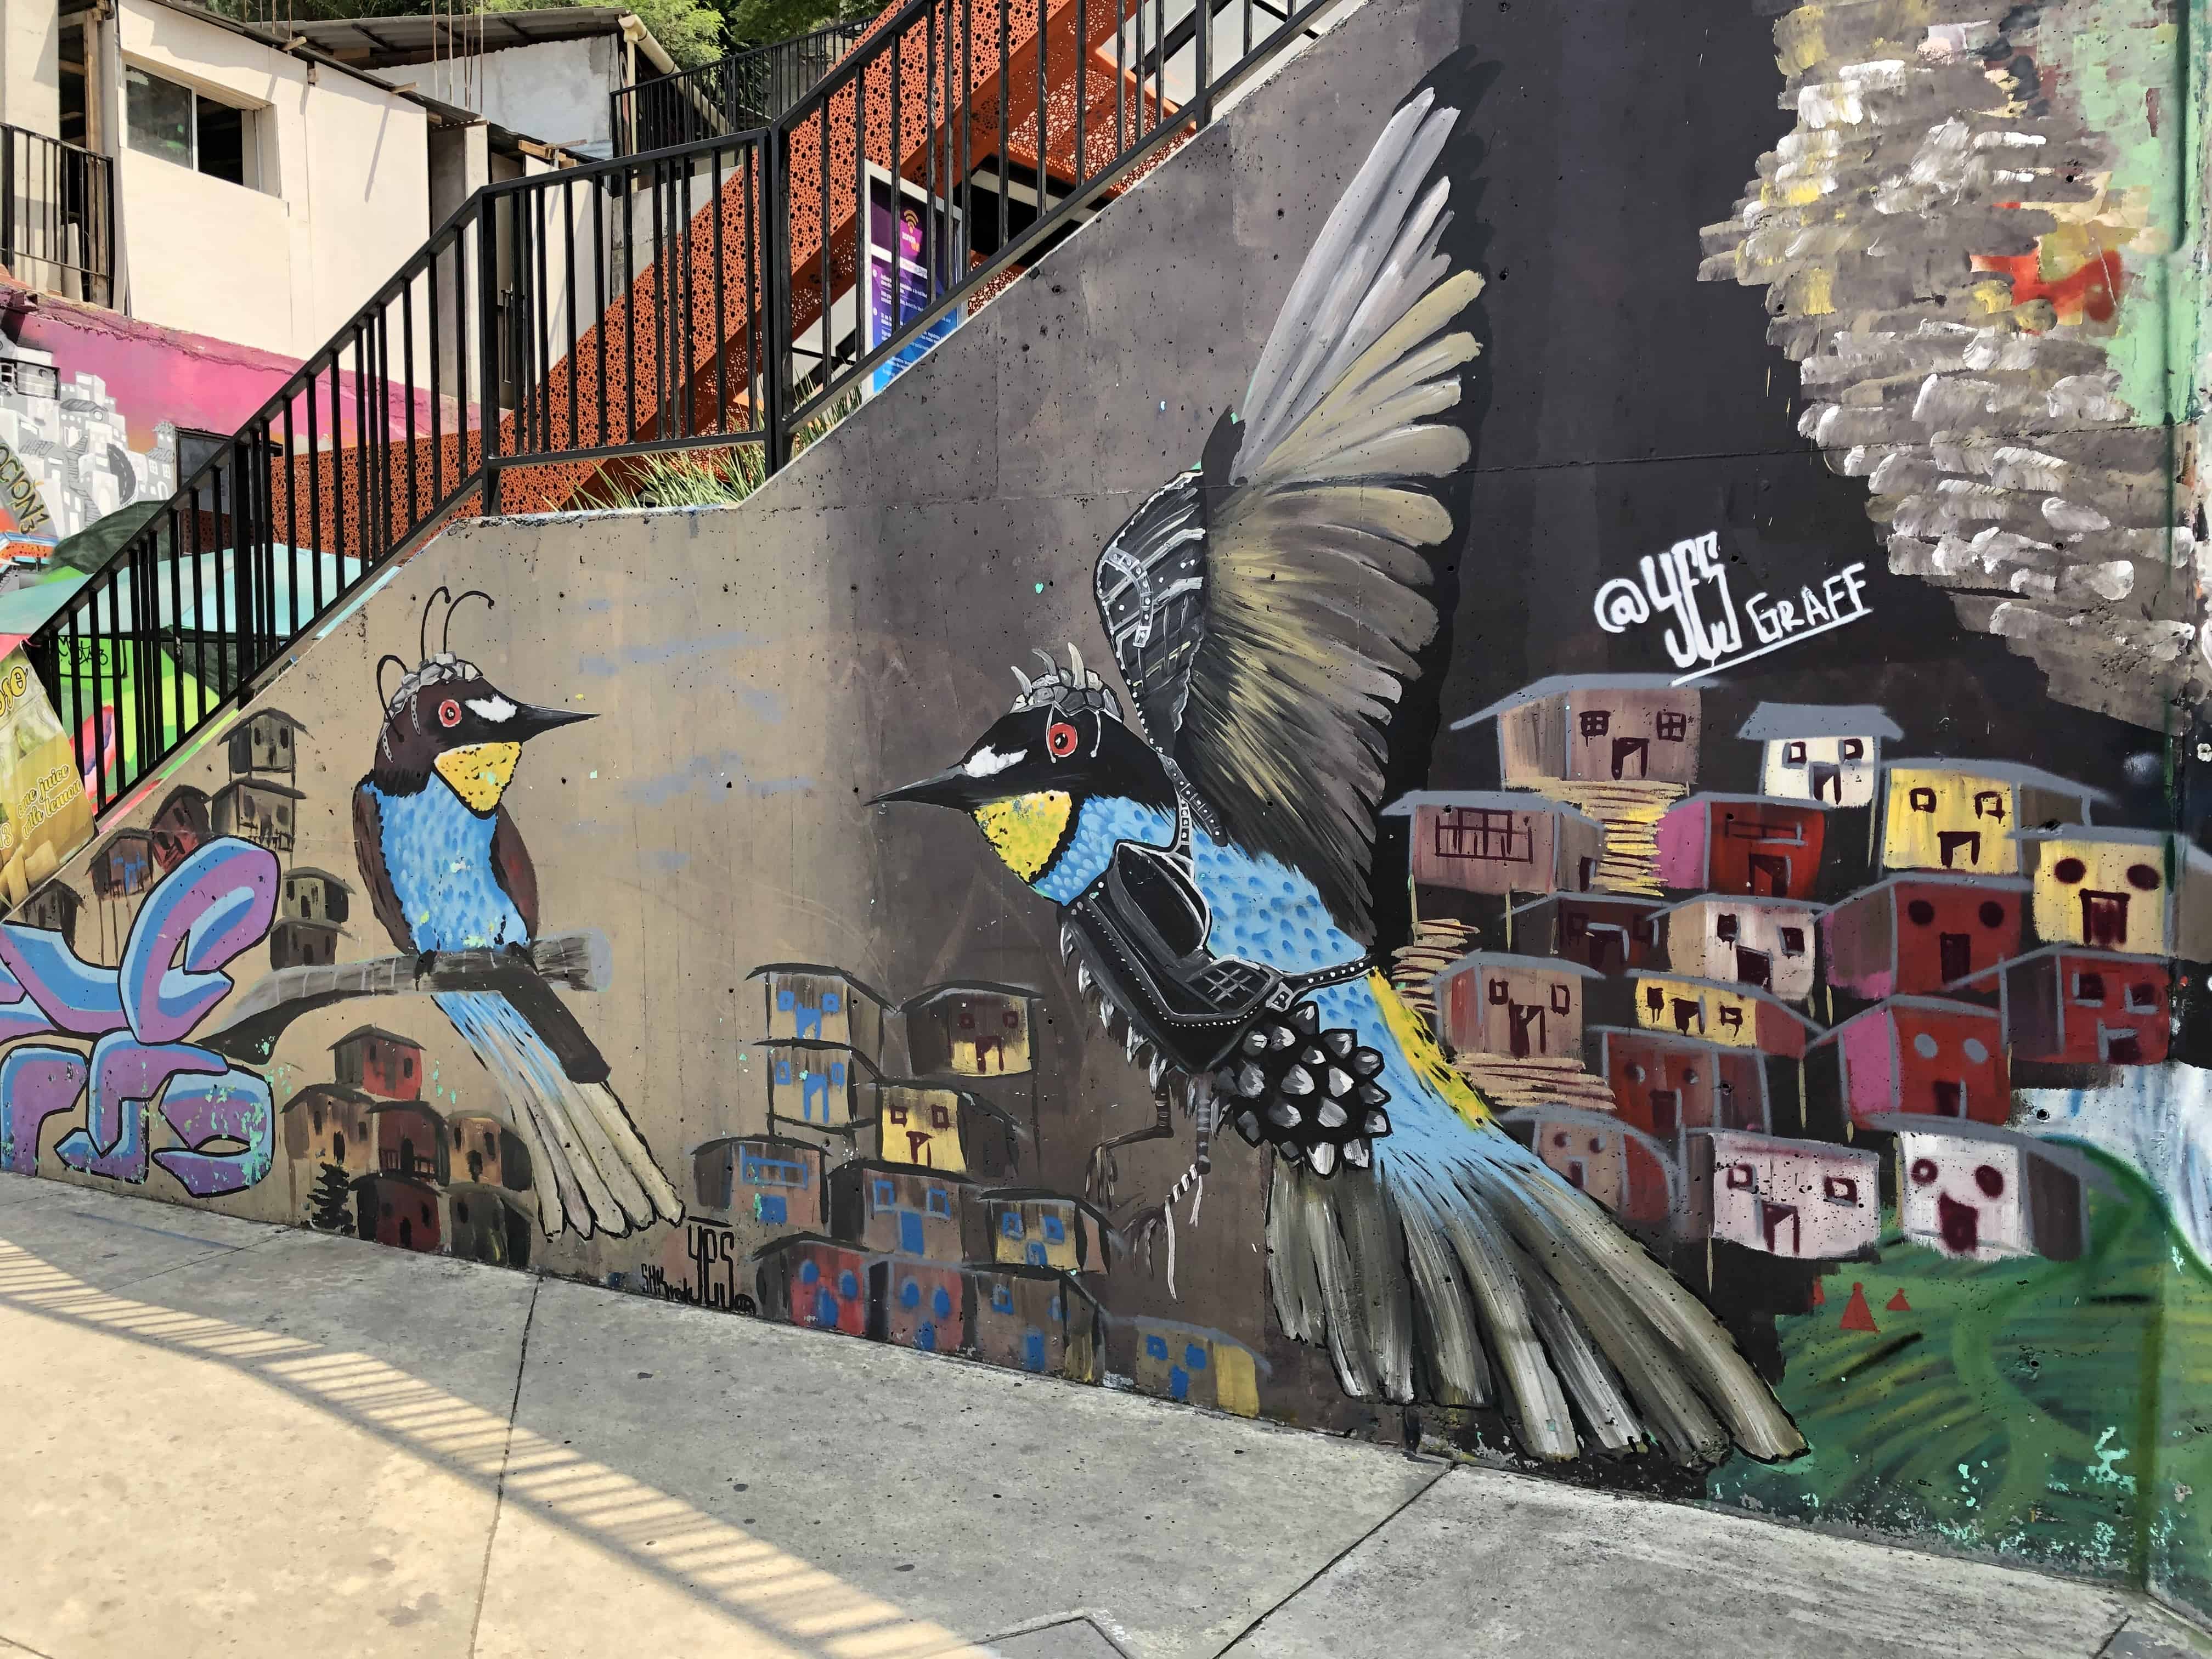 Hummingbirds representing military helicopters in Comuna 13, Medellín, Antioquia, Colombia